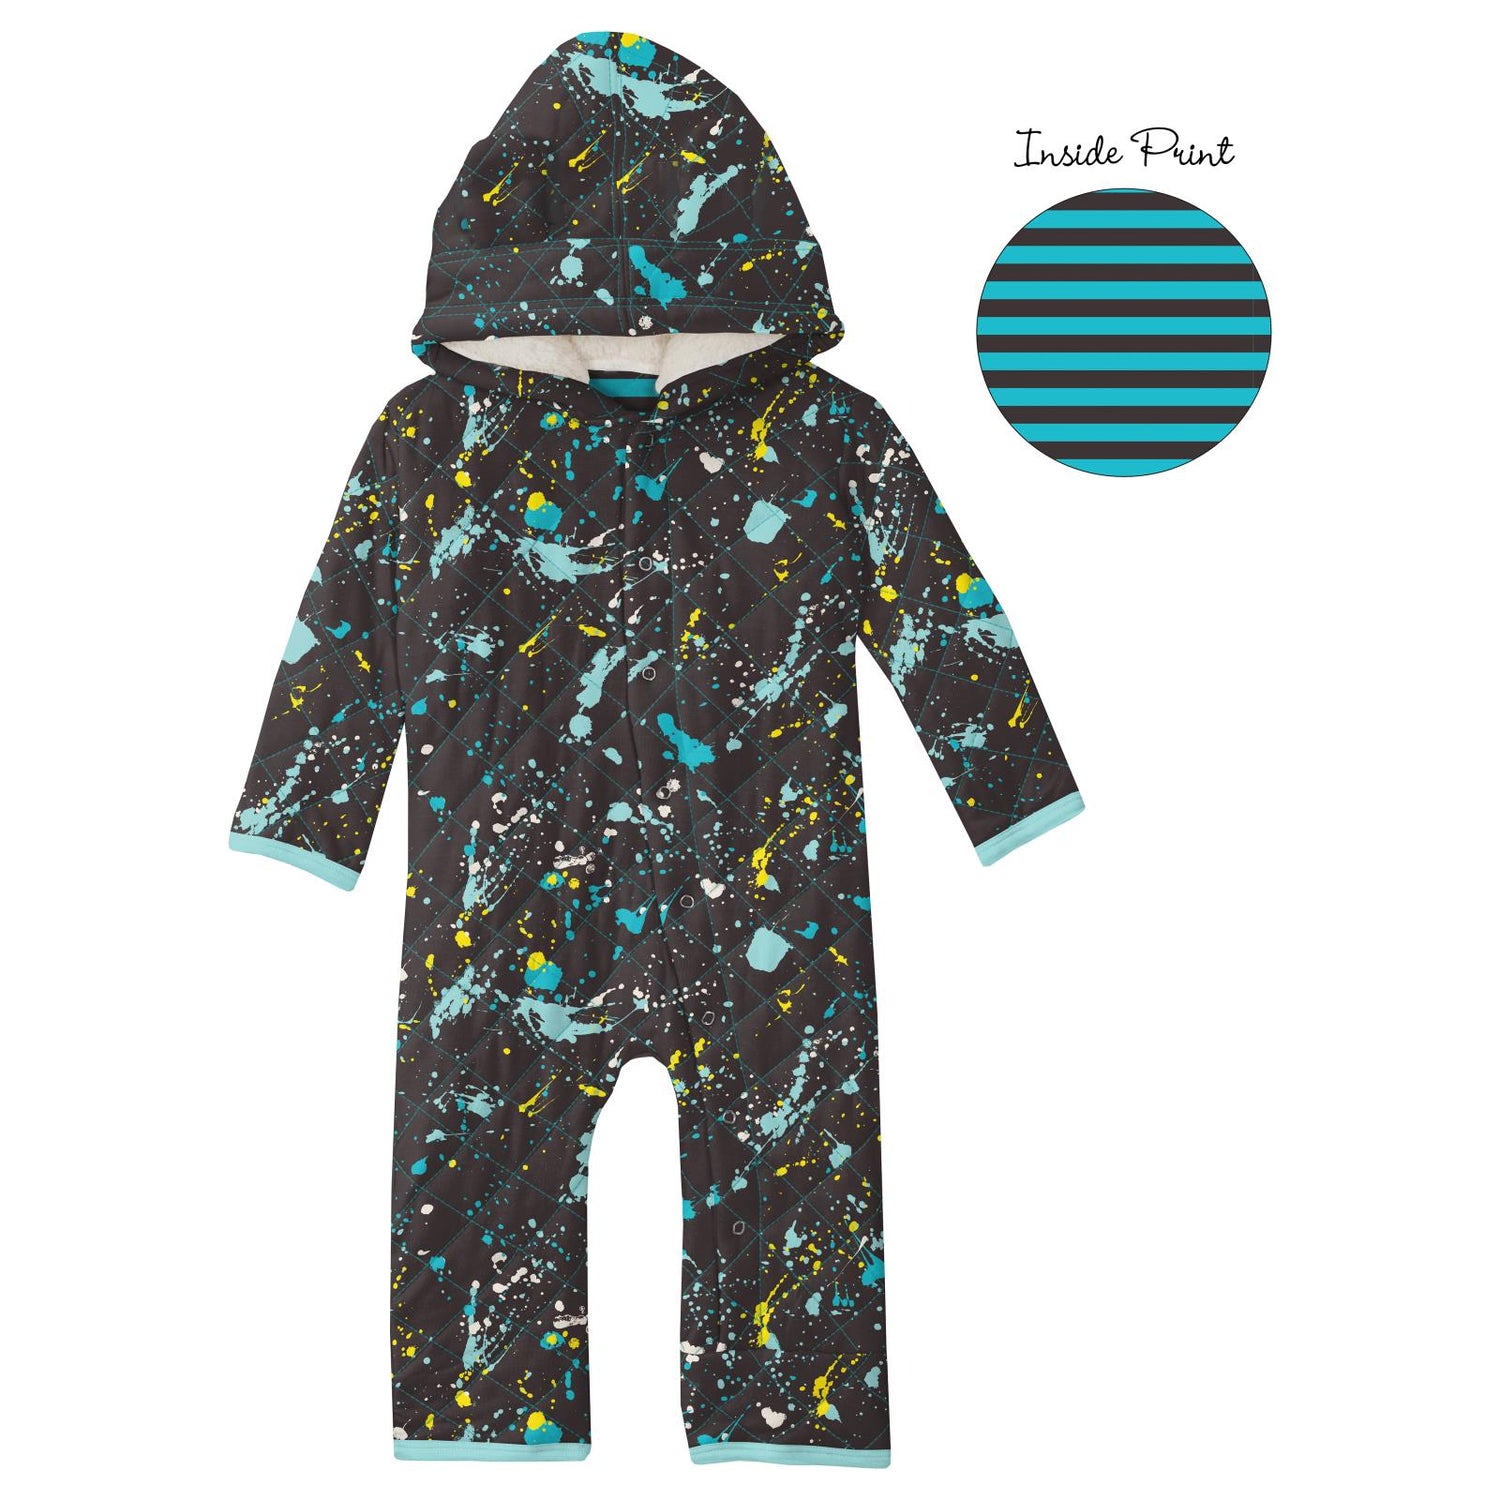 Print Quilted Hoodie Coverall with Sherpa-Lined Hood in Confetti Splatter Paint/Rad Stripe